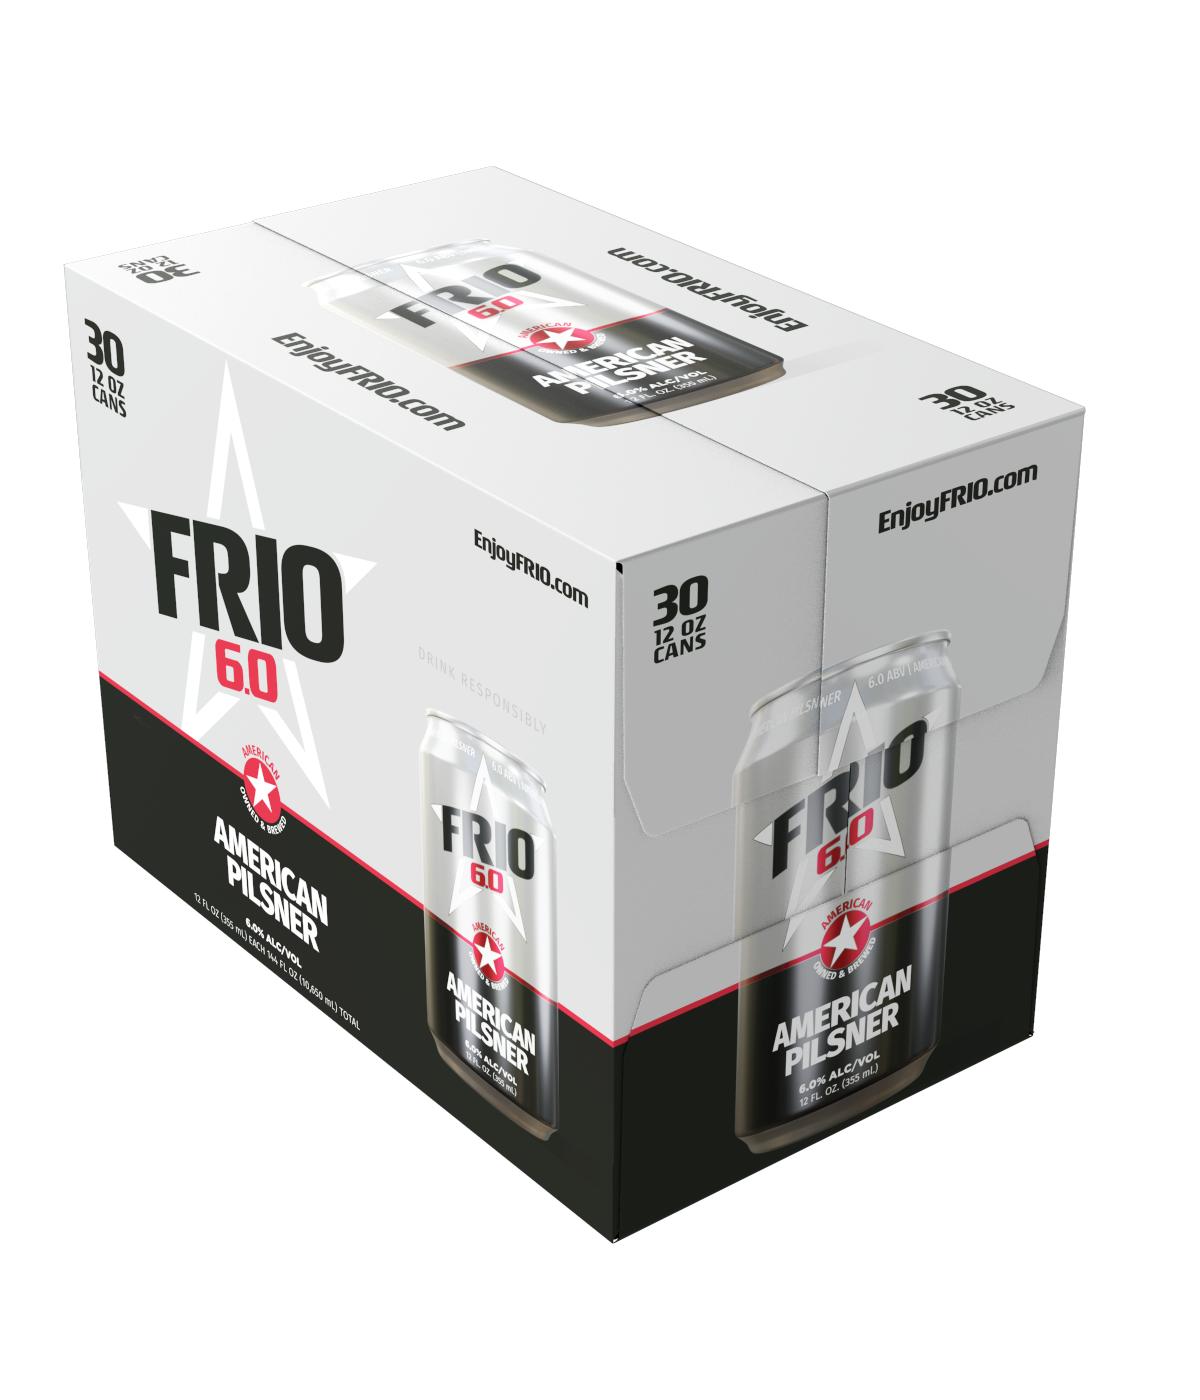 Frio 6.0 Beer 12 oz Cans; image 2 of 2